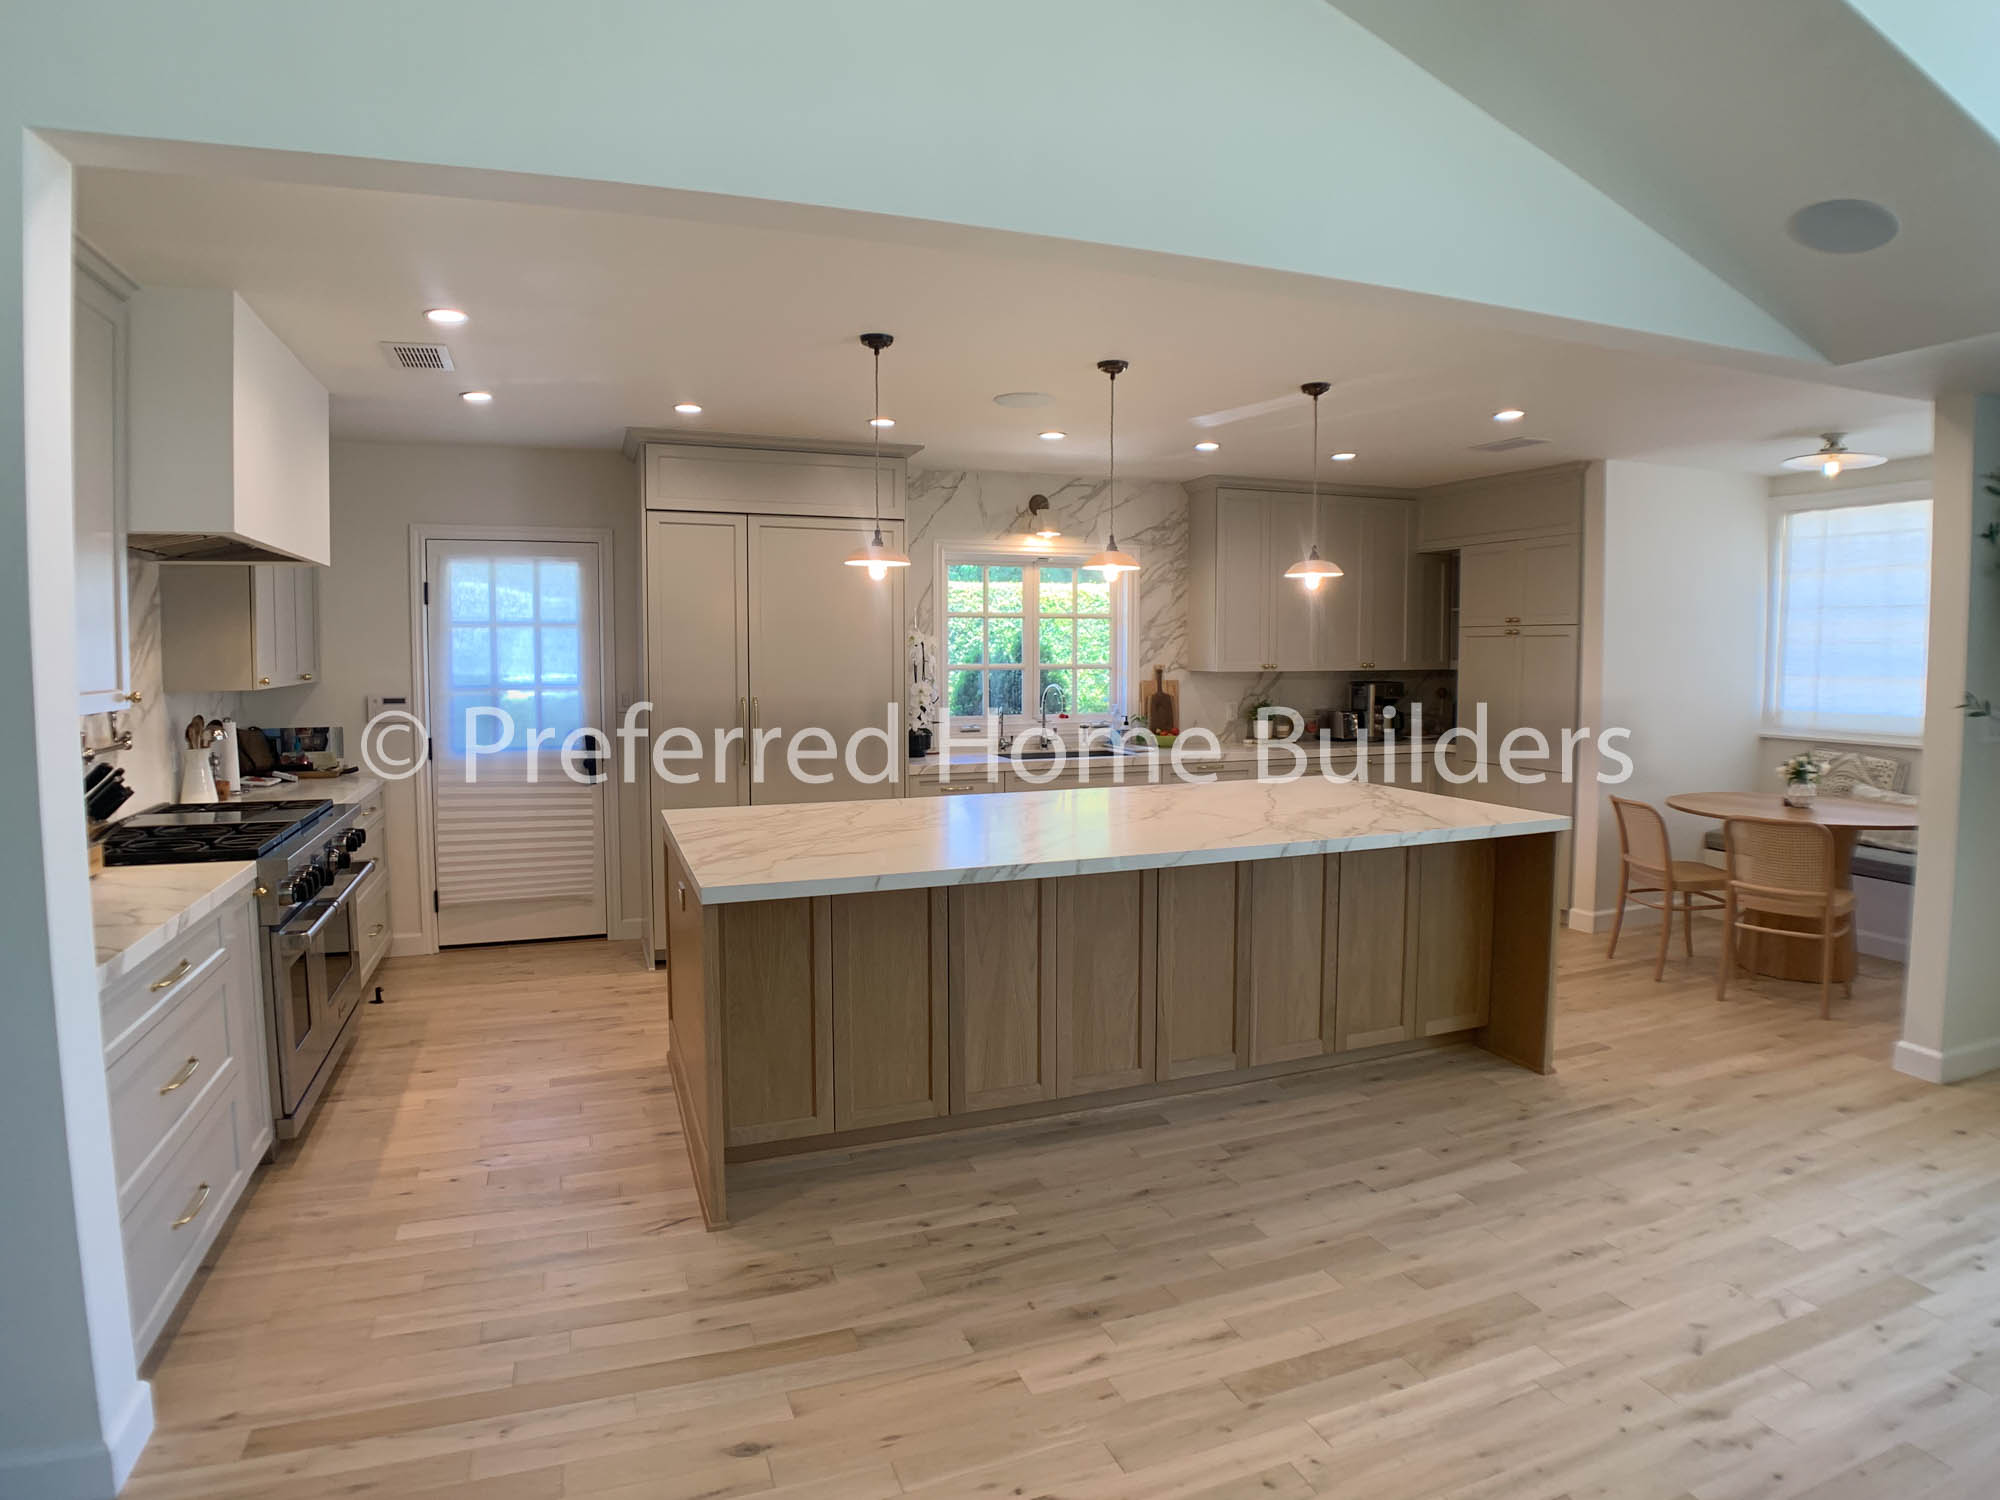 General Remodel in Brentwood Heights